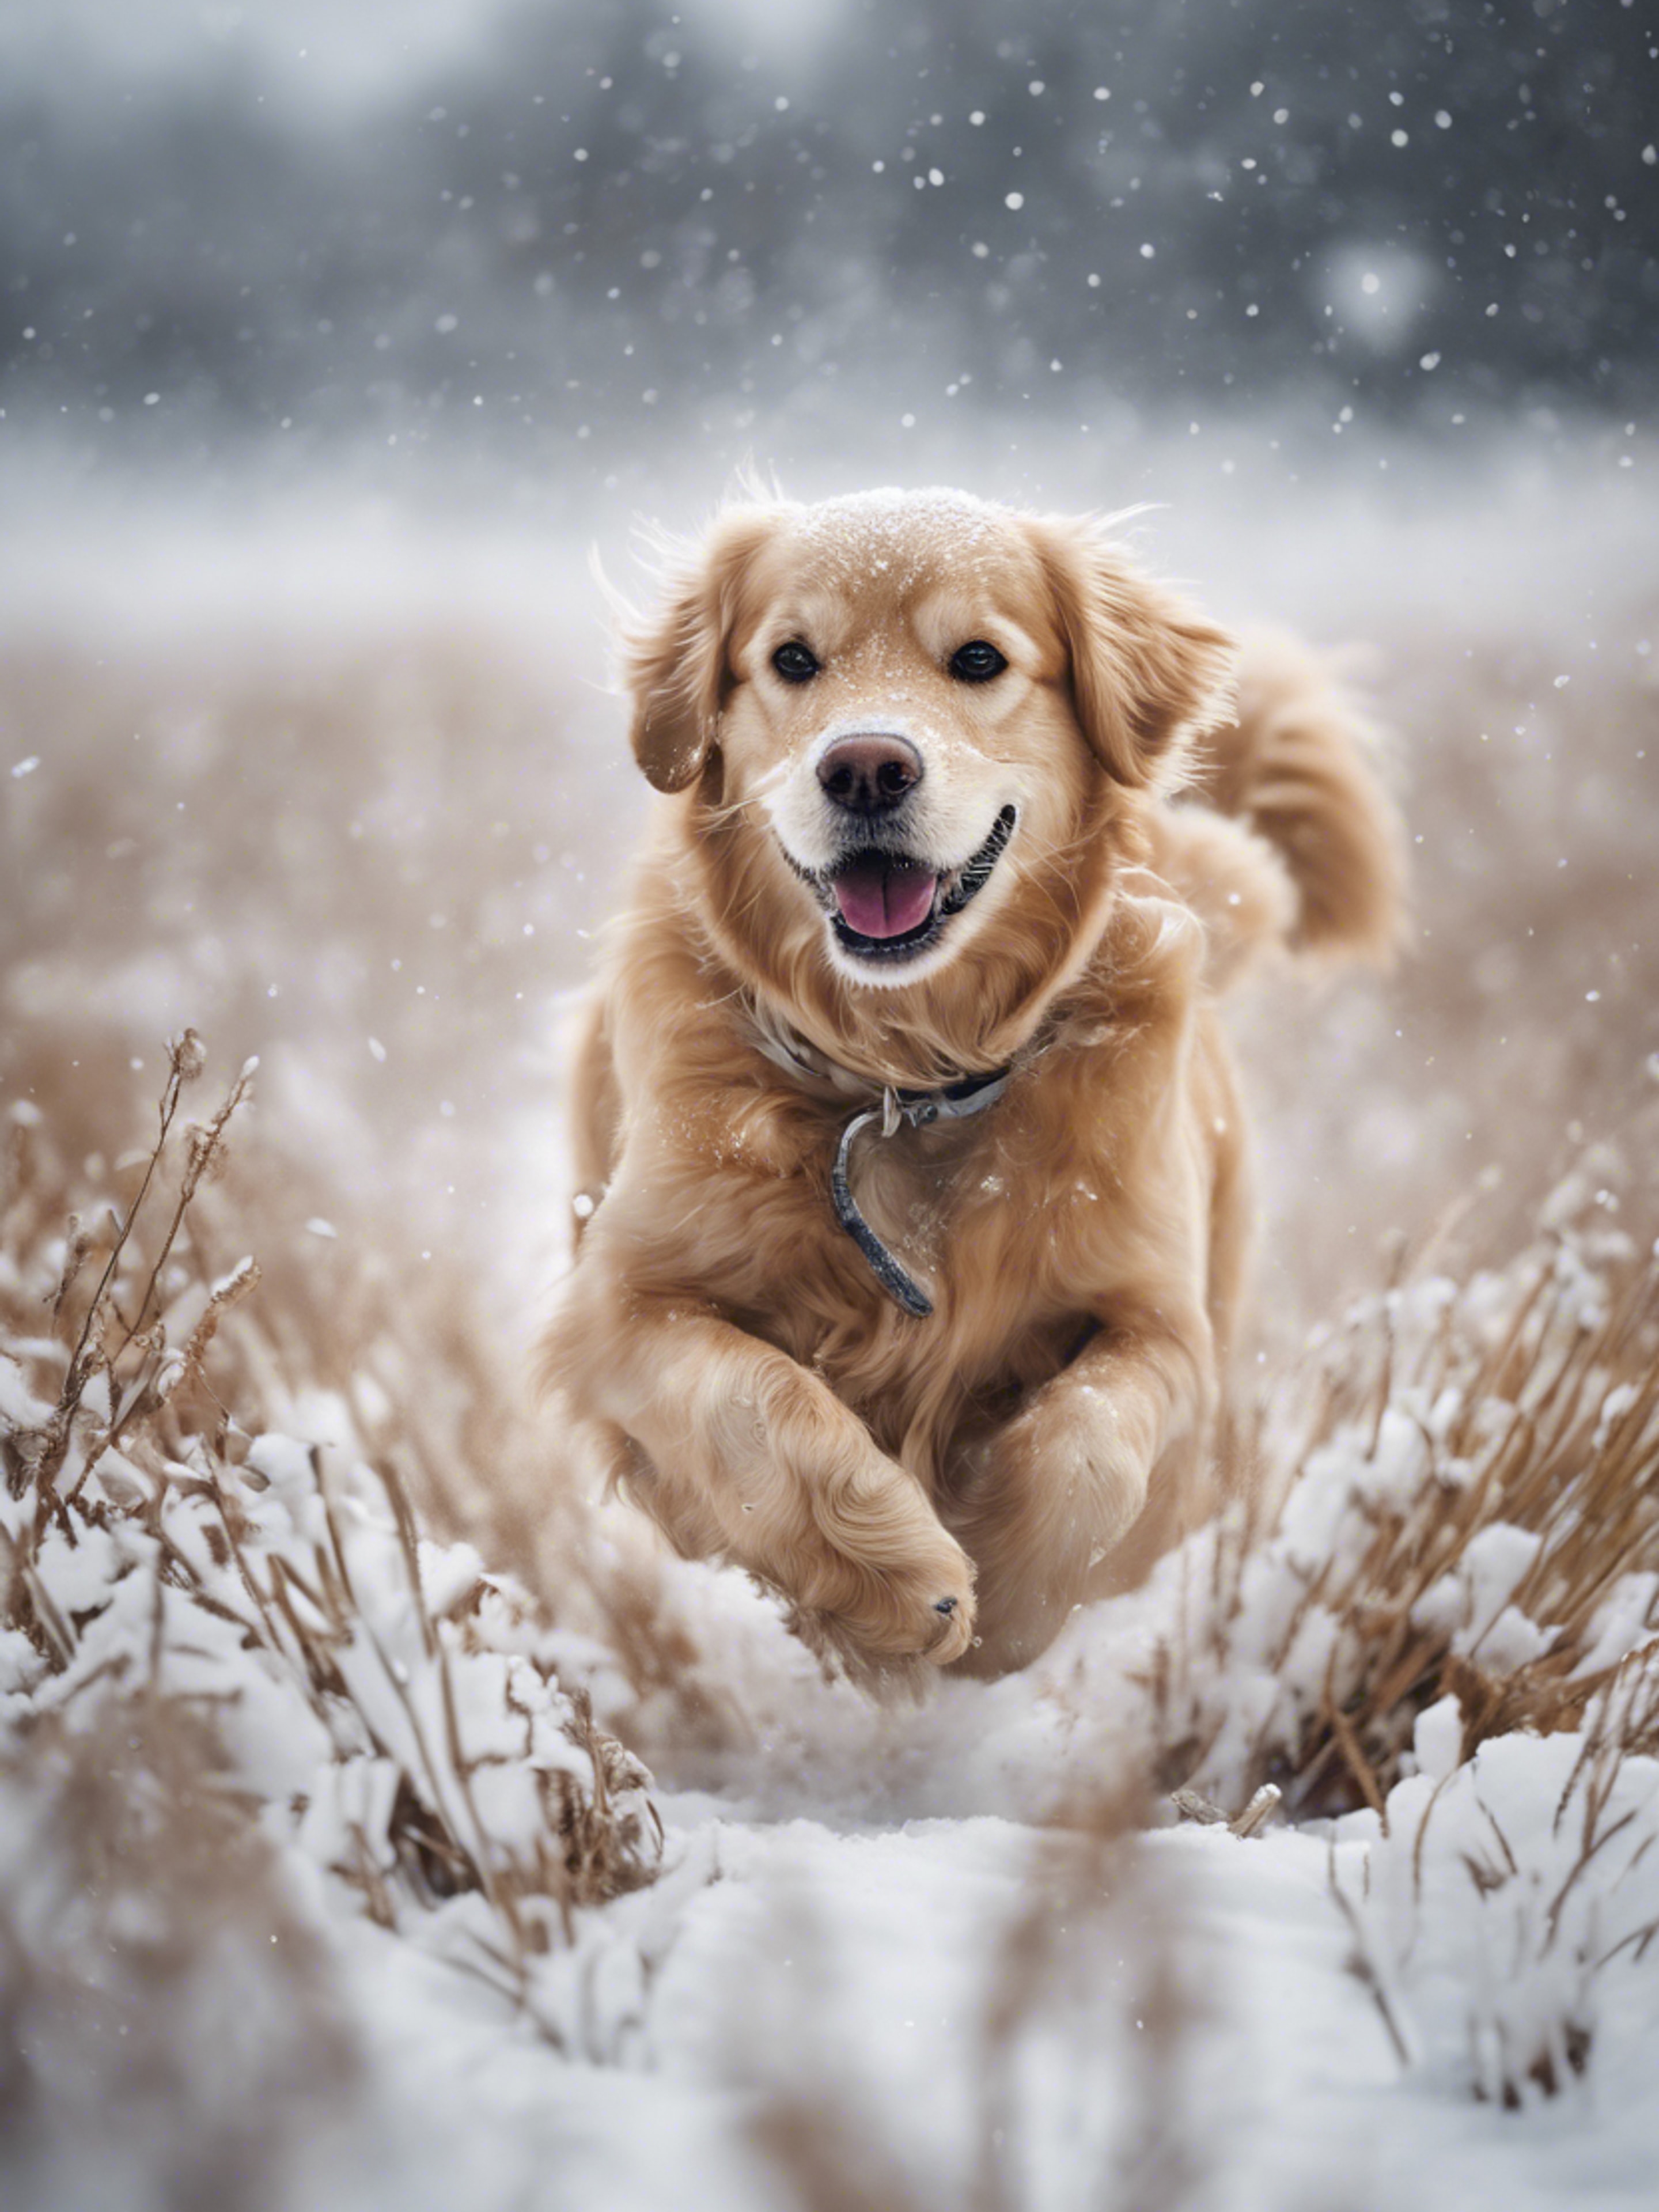 A golden retriever joyously bounding through a snow-covered field, its fur dusted with white.壁紙[f6017614d53444c2949b]